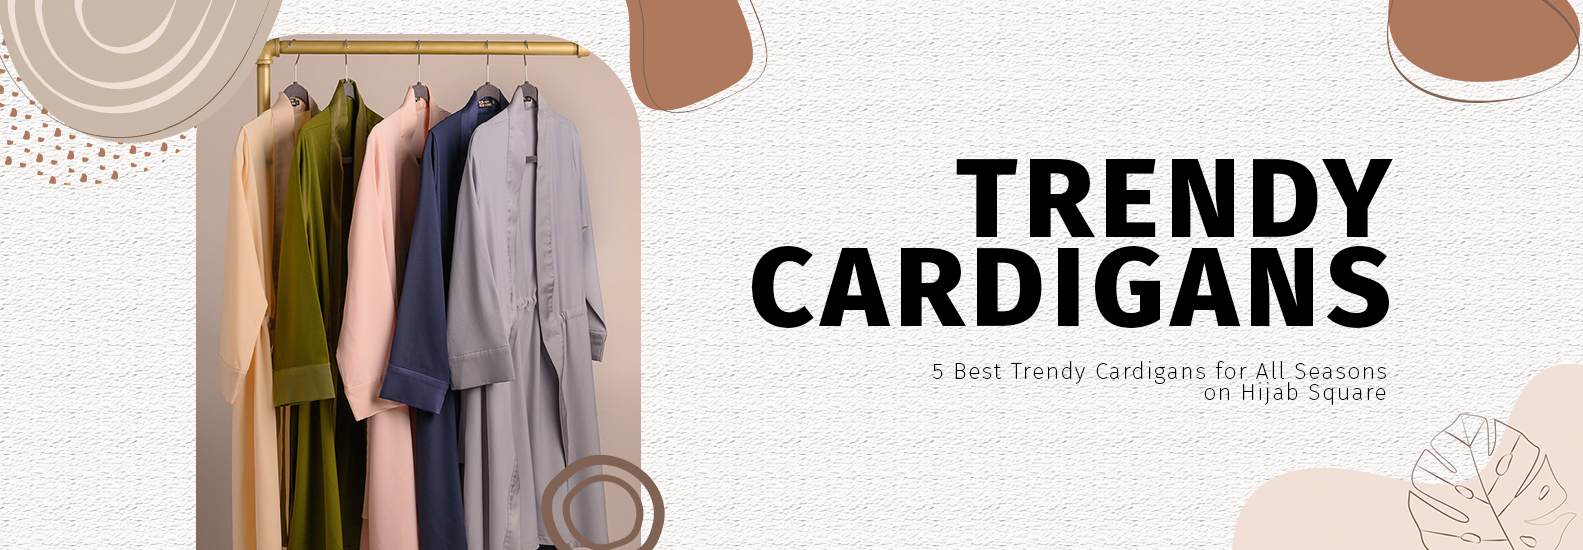 5 Best Trendy Cardigans for All Seasons on Hijab Square